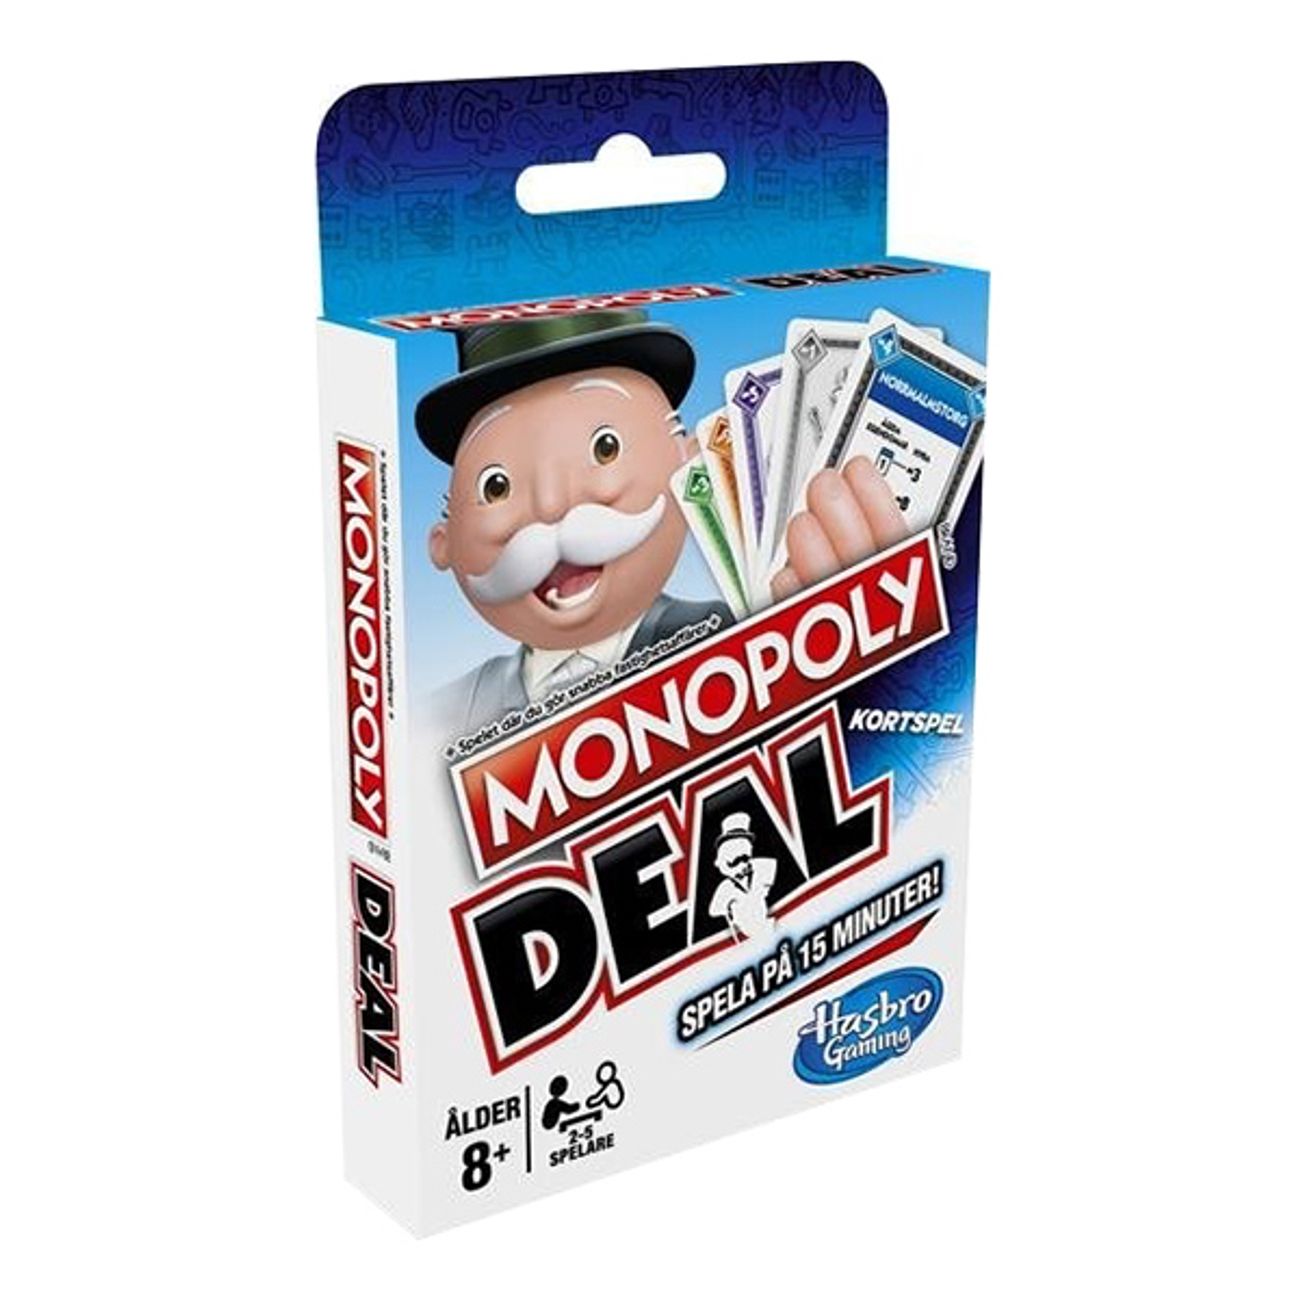 monopoly-deal-2